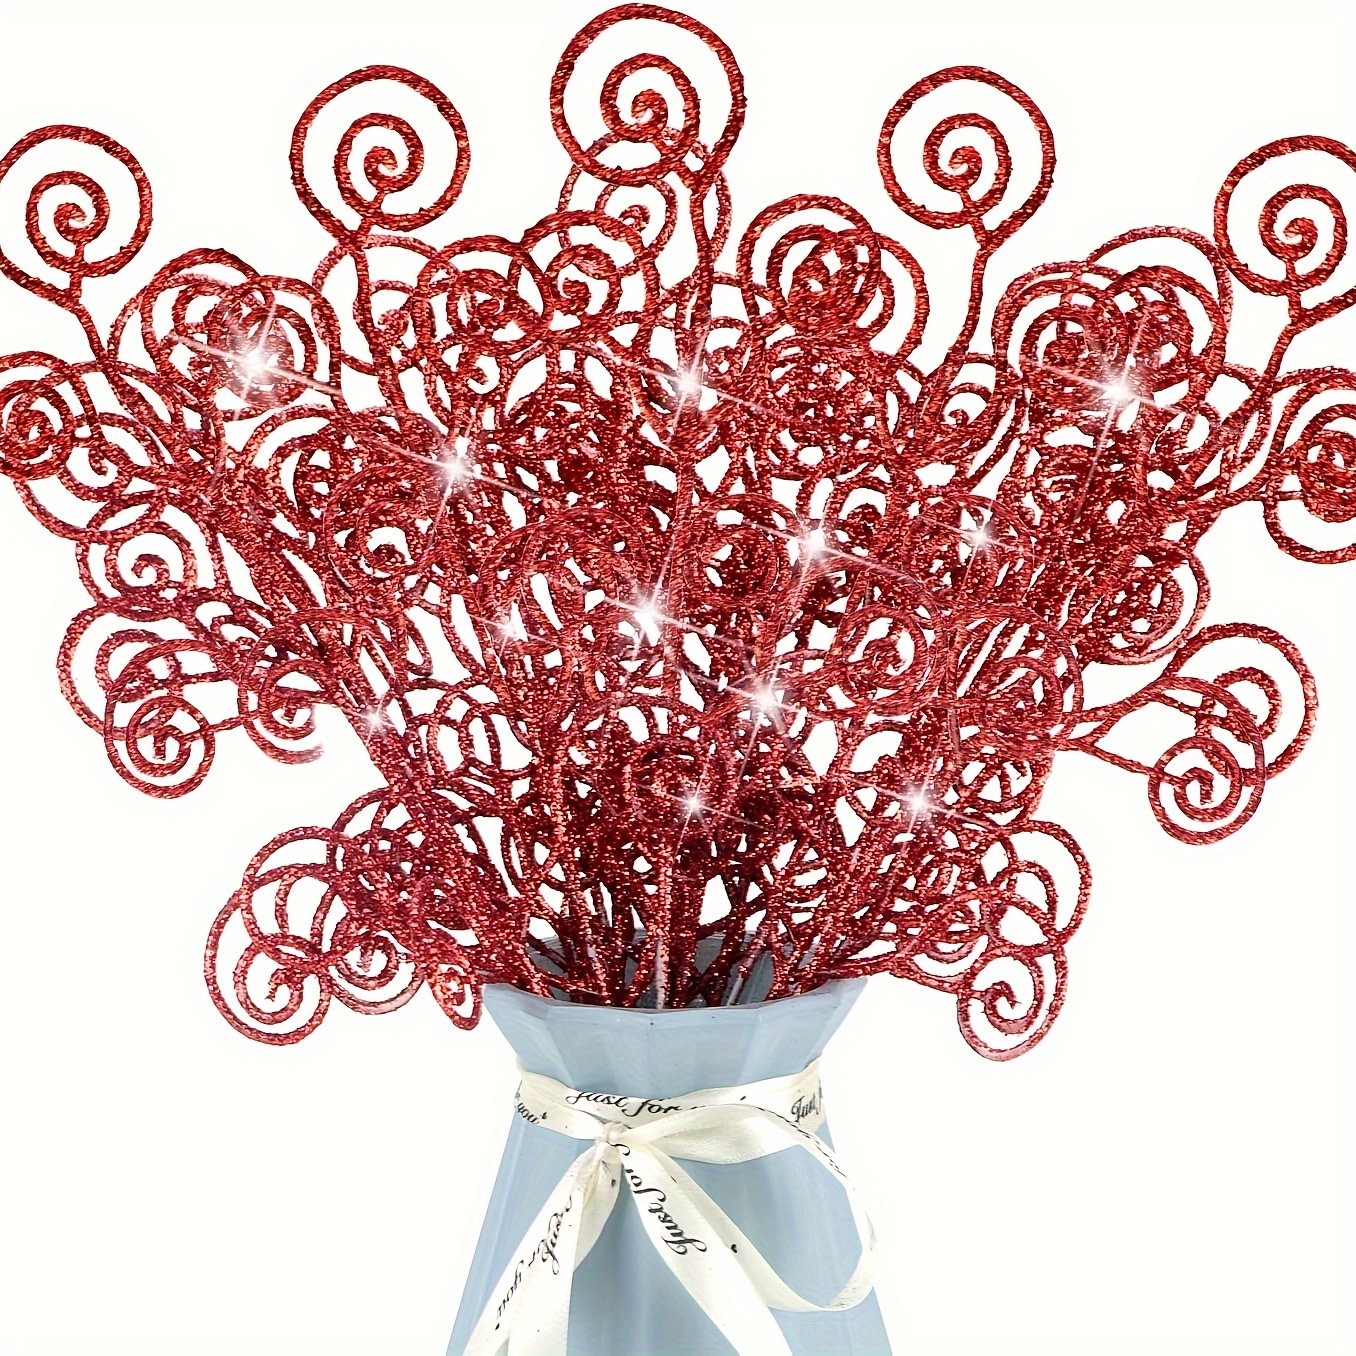 20pcs Artificial Stem Picks Ornaments, Curly Tree Picks And Sprays Twigs  Glitter Branch, 12 Inch Decorative Candy Shape Sticks For Halloween  Christmas